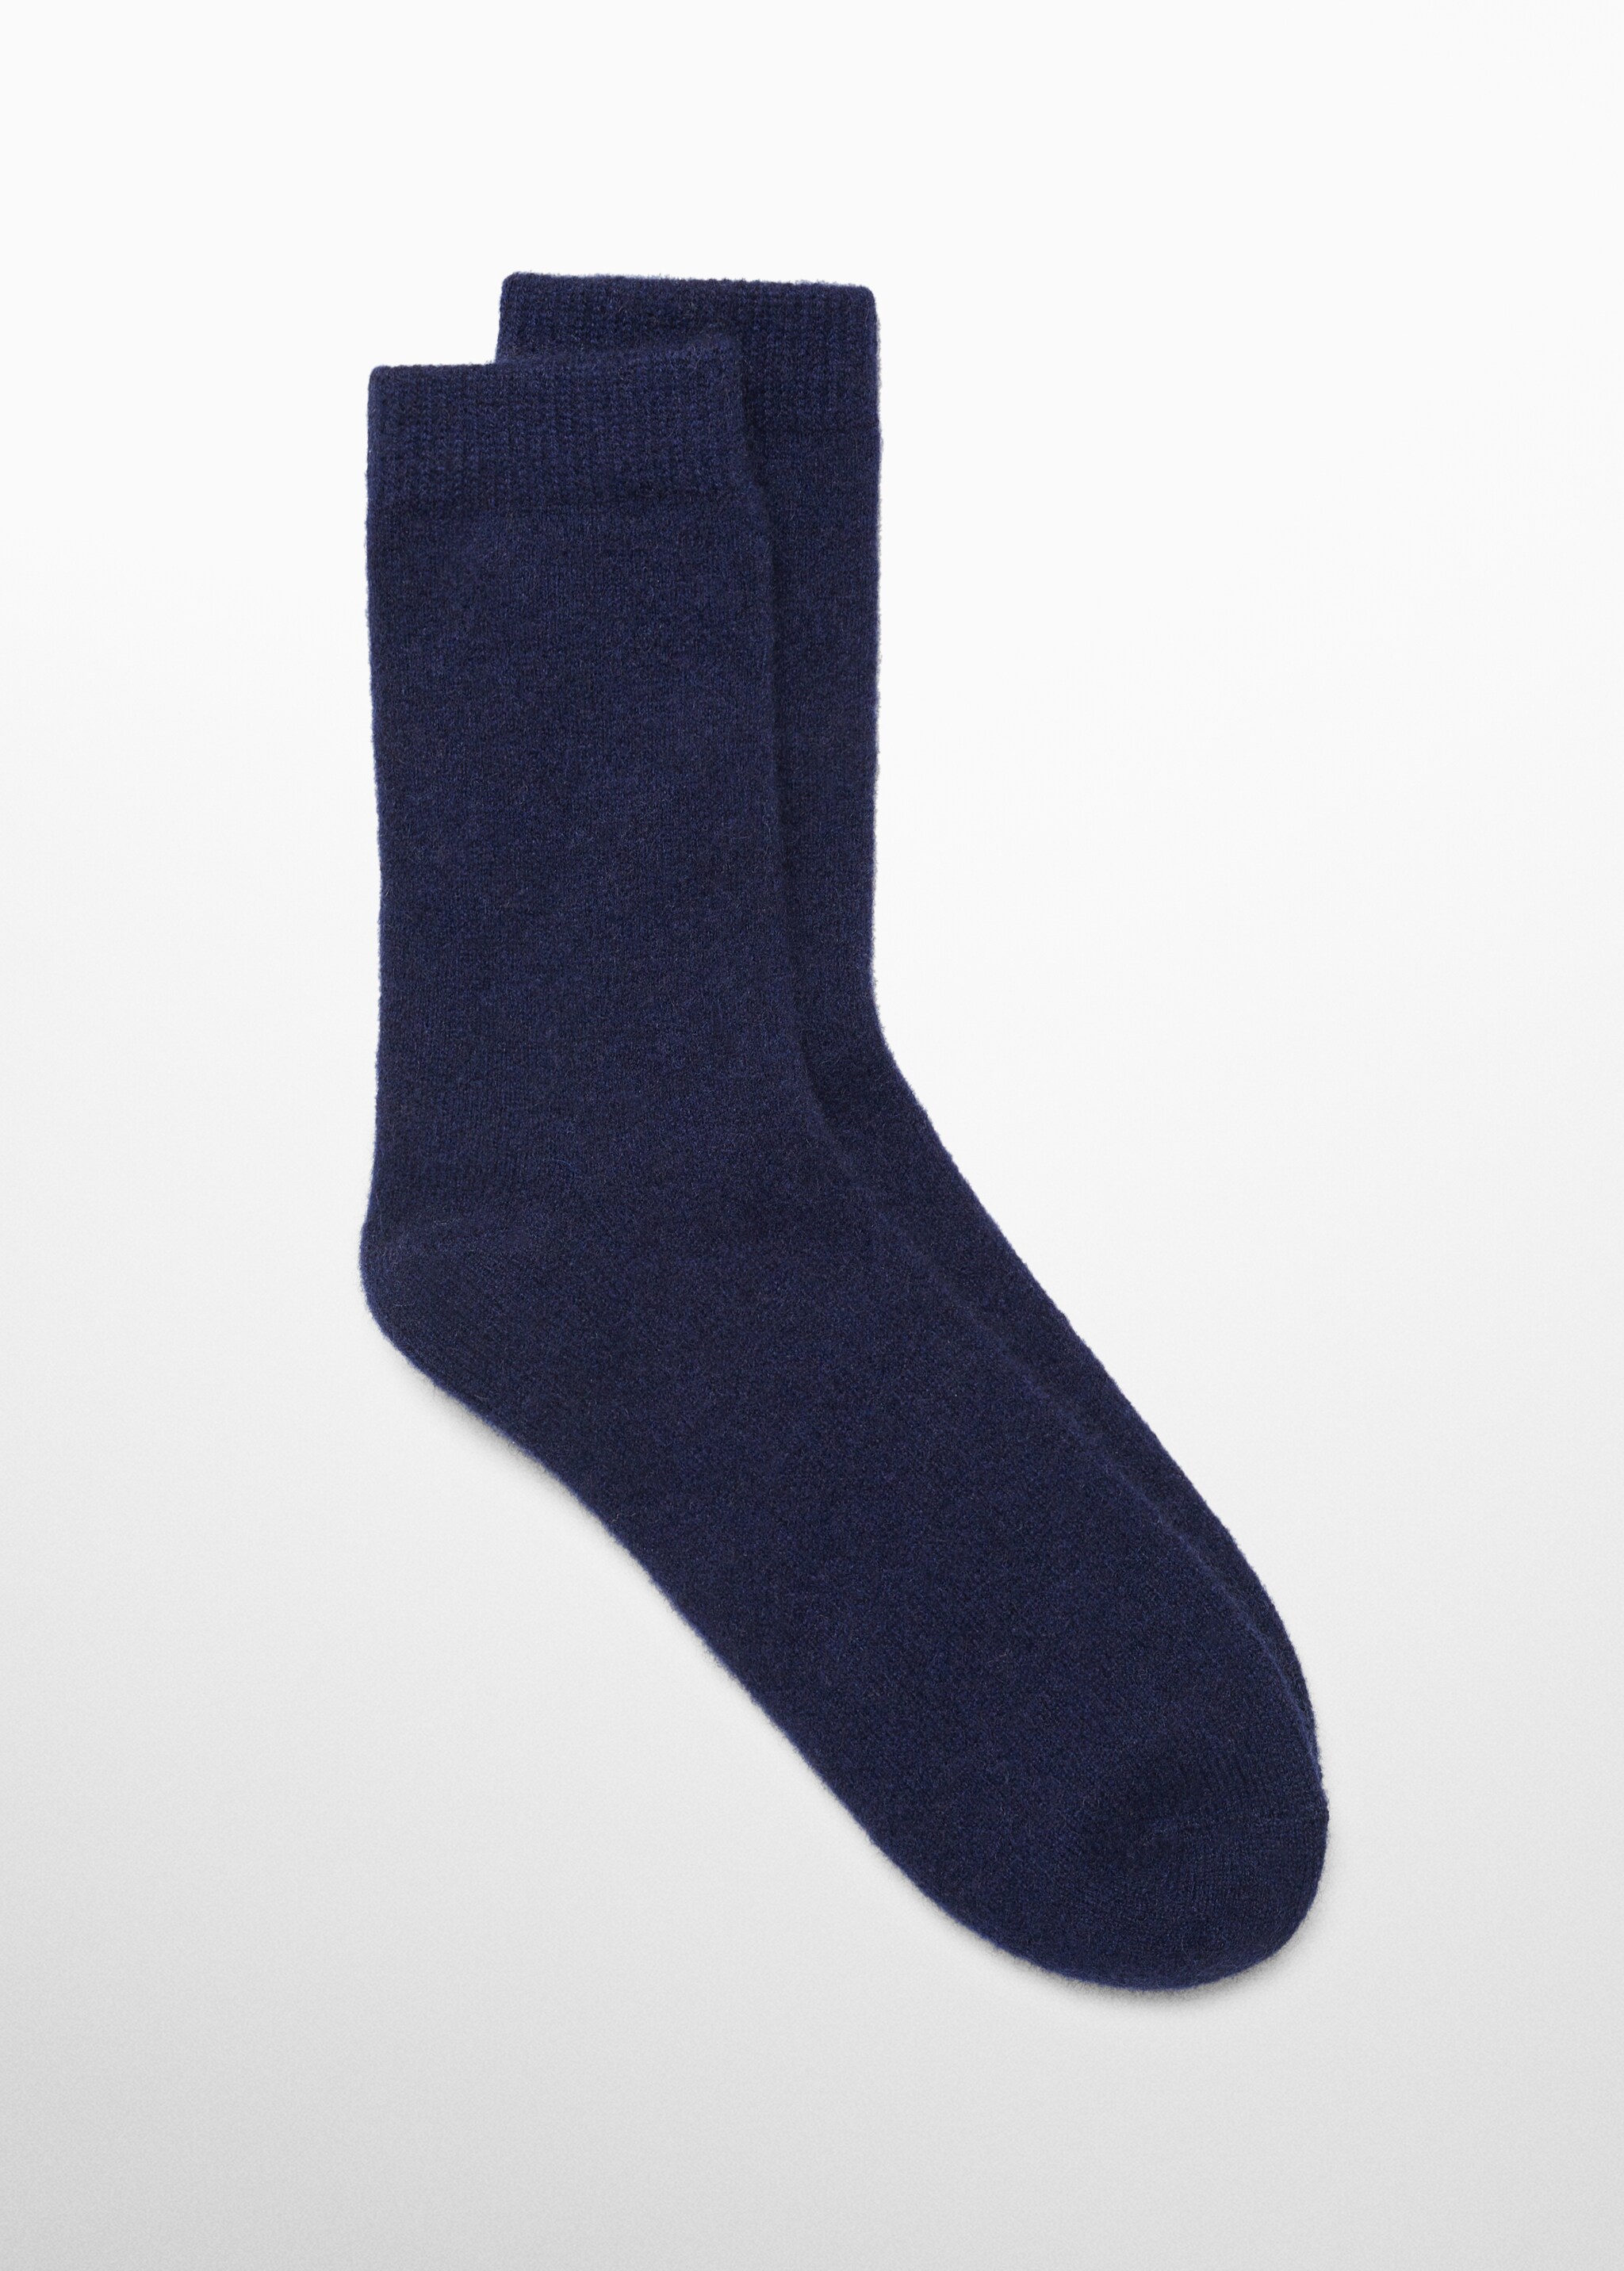 Cashmere knitted socks - Article without model